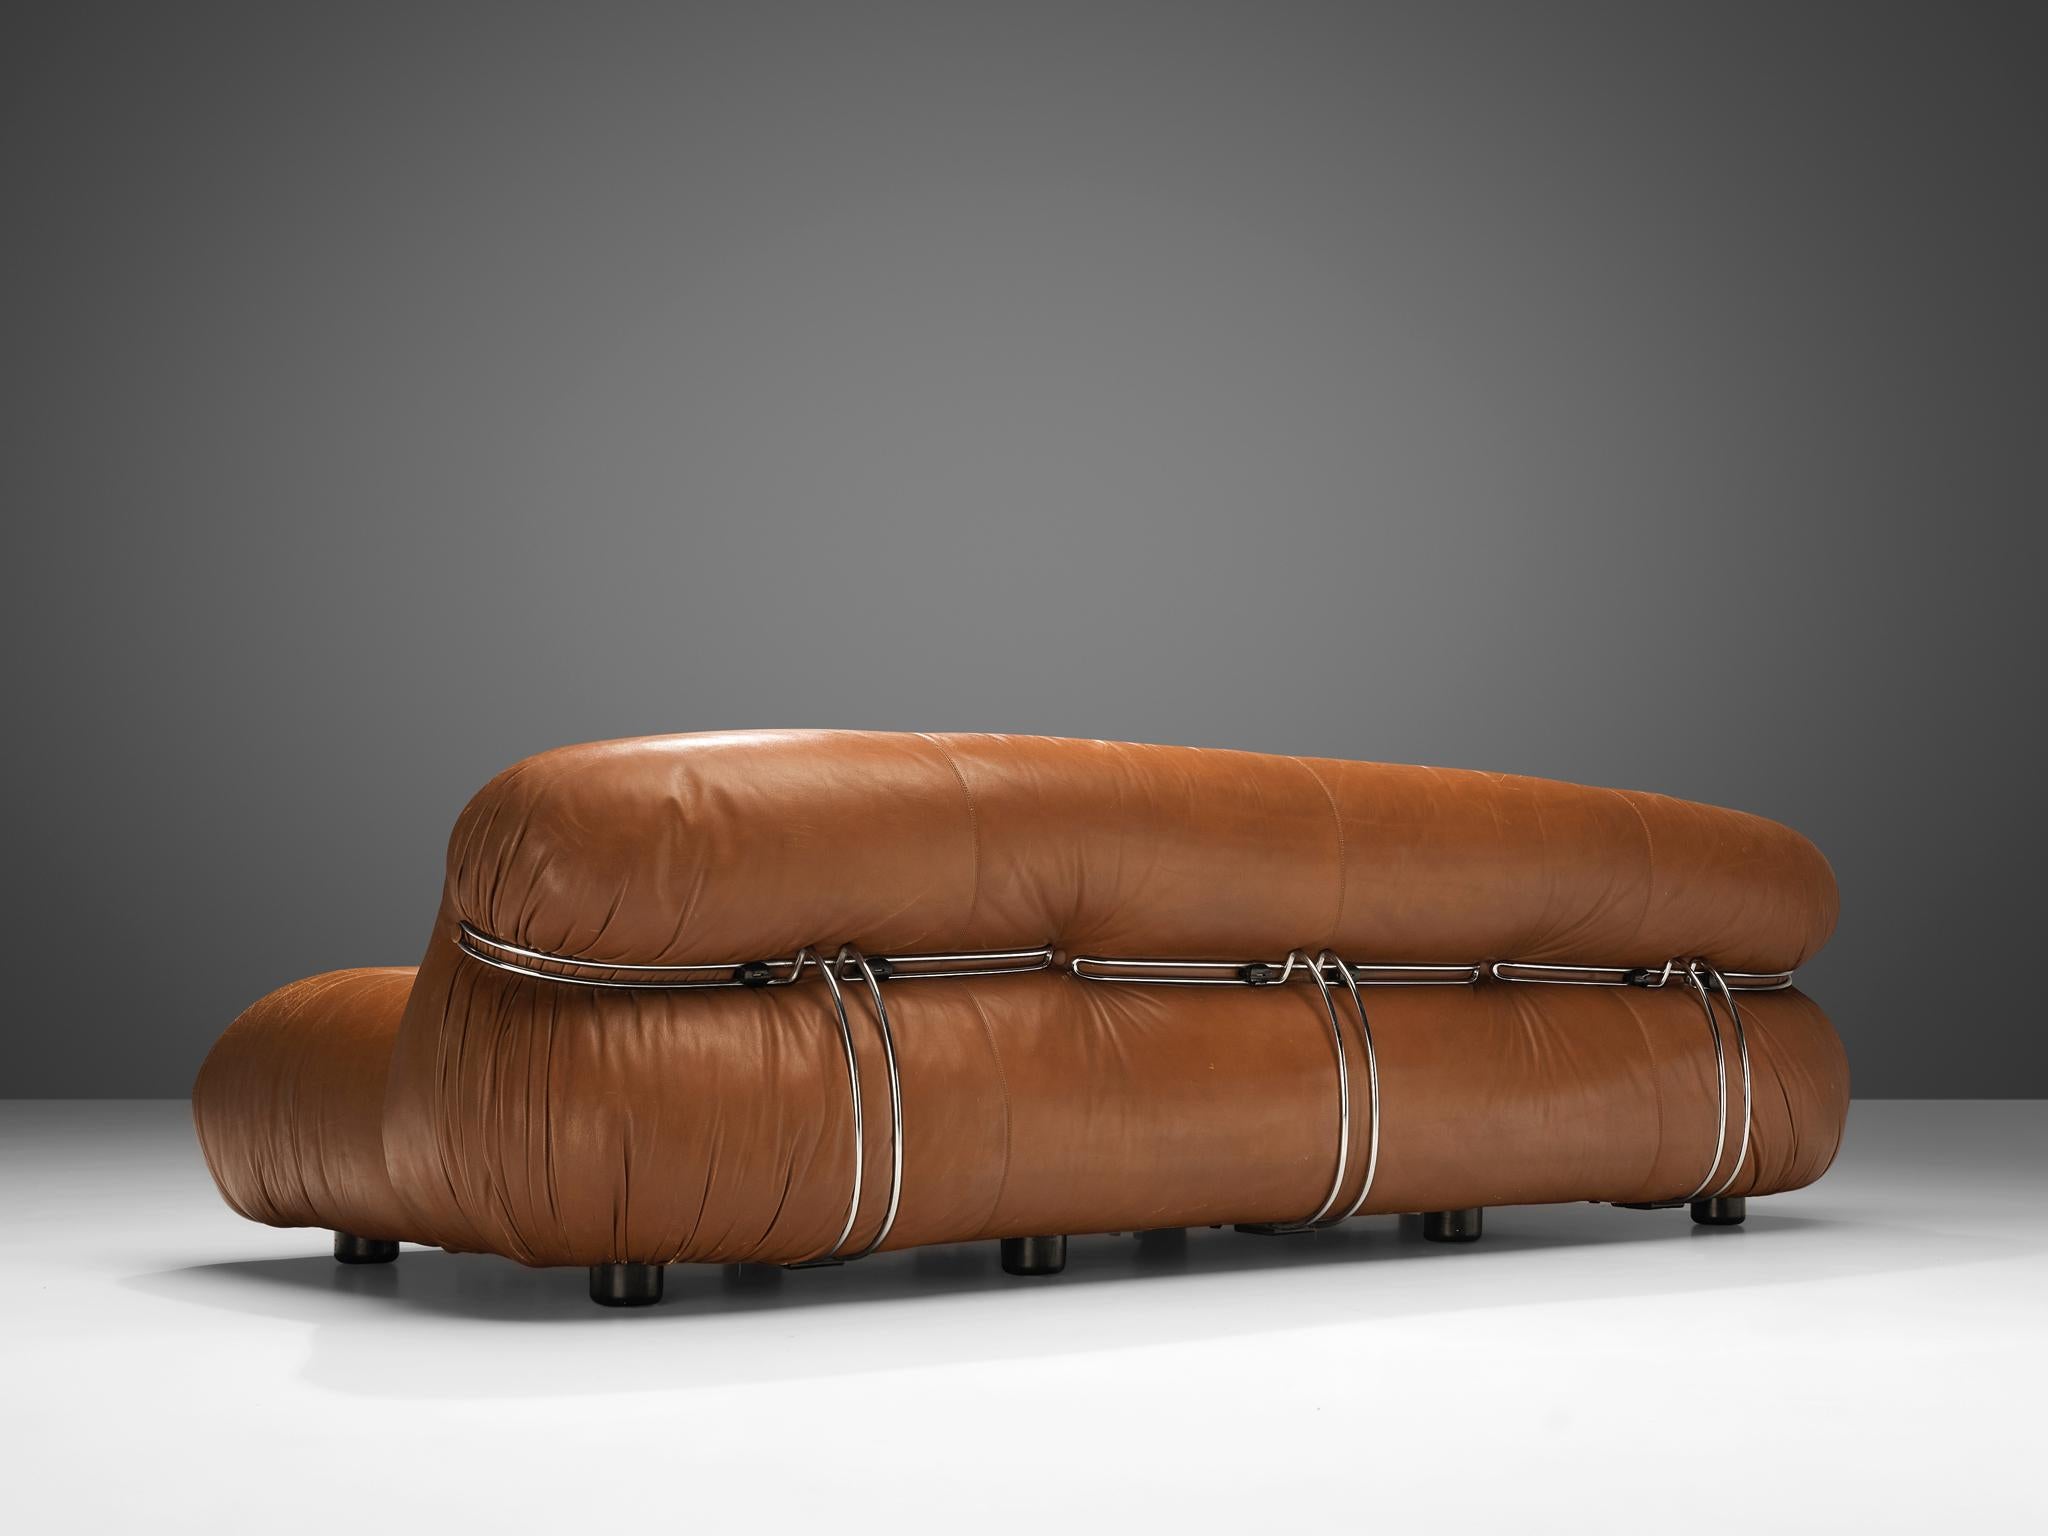 Italian Listing for D: Afra & Tobia Scarpa 'Soriana' Sofa in Patinated Brown Leather